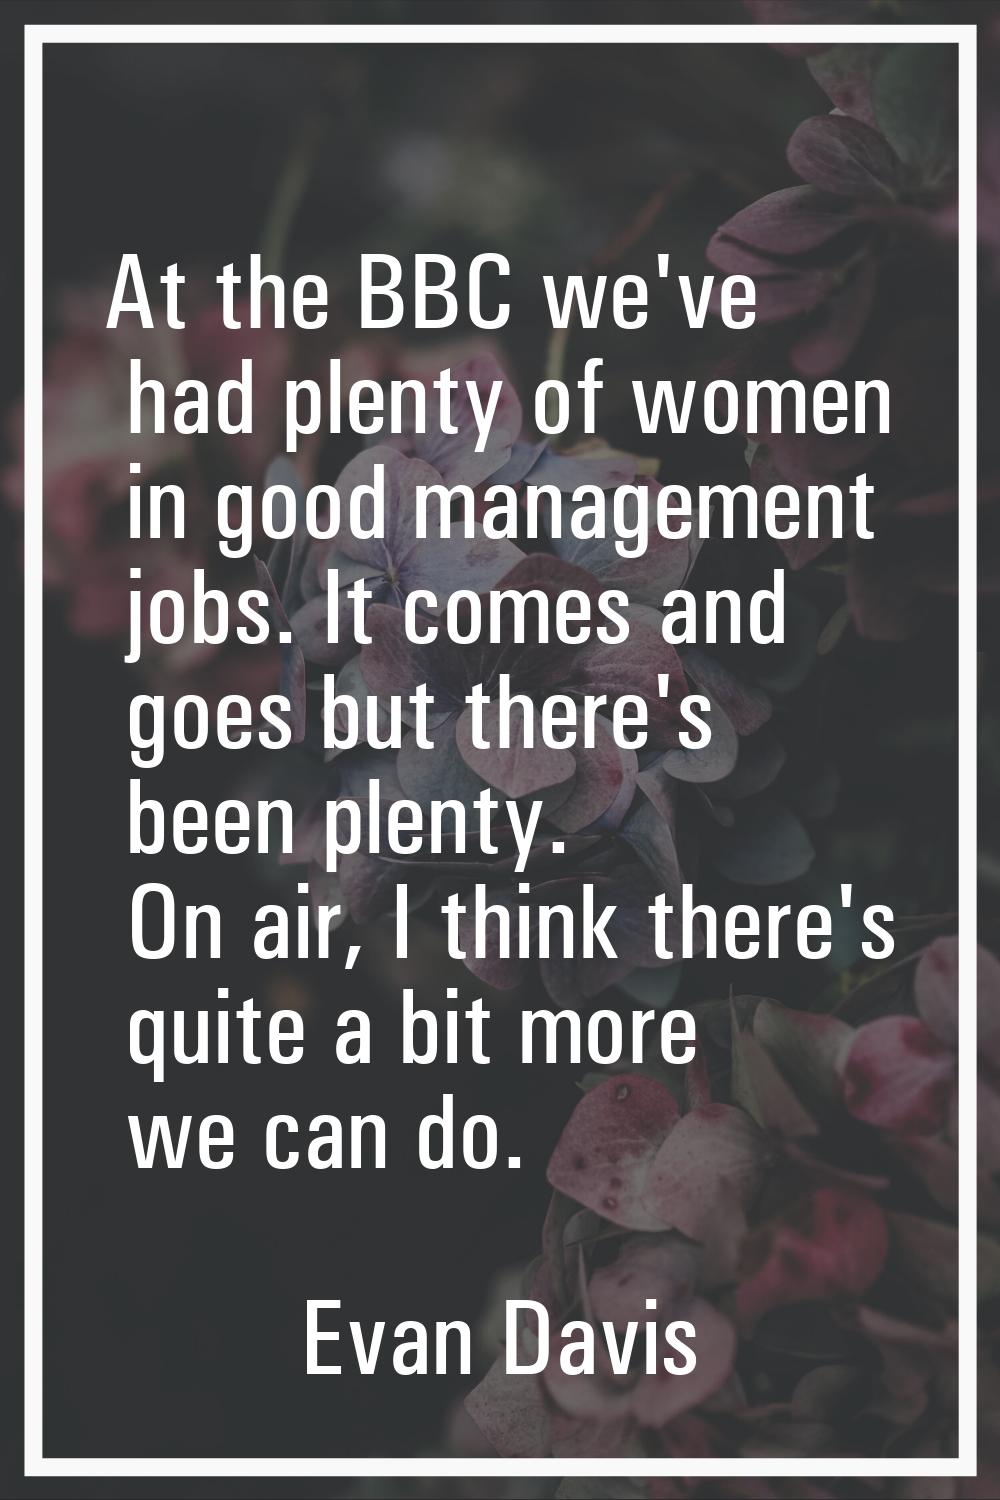 At the BBC we've had plenty of women in good management jobs. It comes and goes but there's been pl